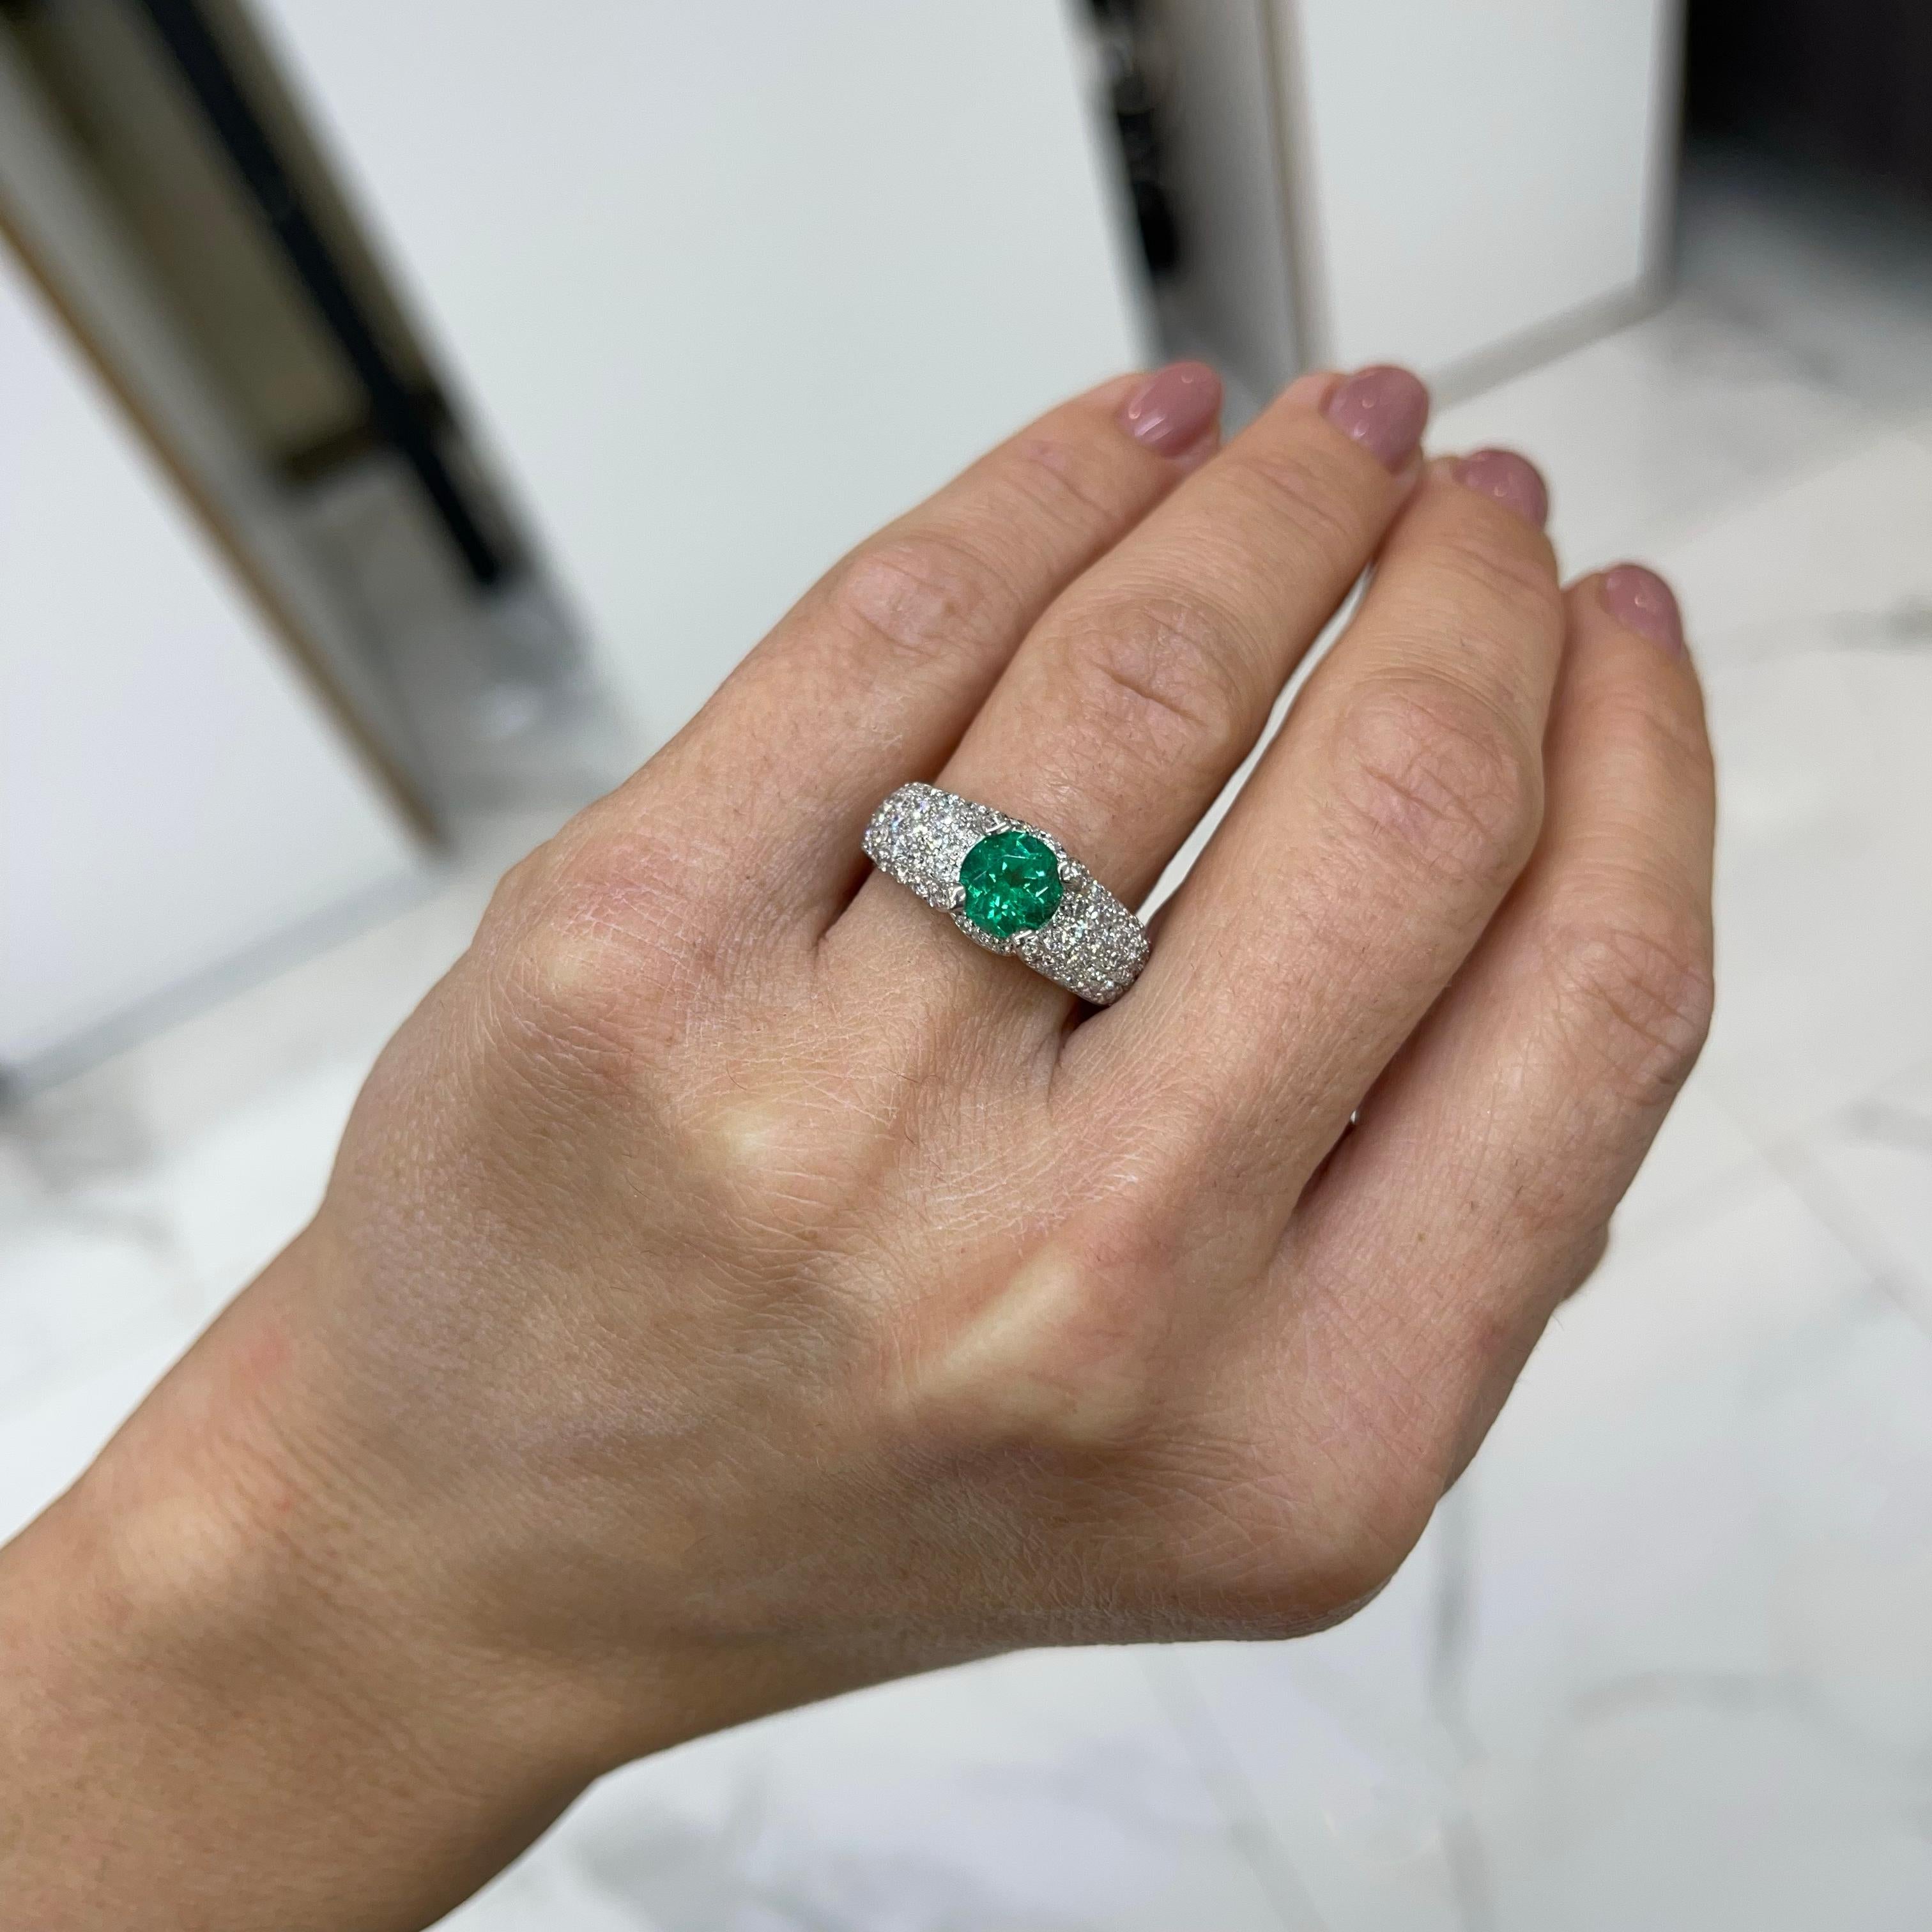 Ladies 18K White Gold 1.28CT. Emerald Pave Diamond Cocktail Ring For Sale 3